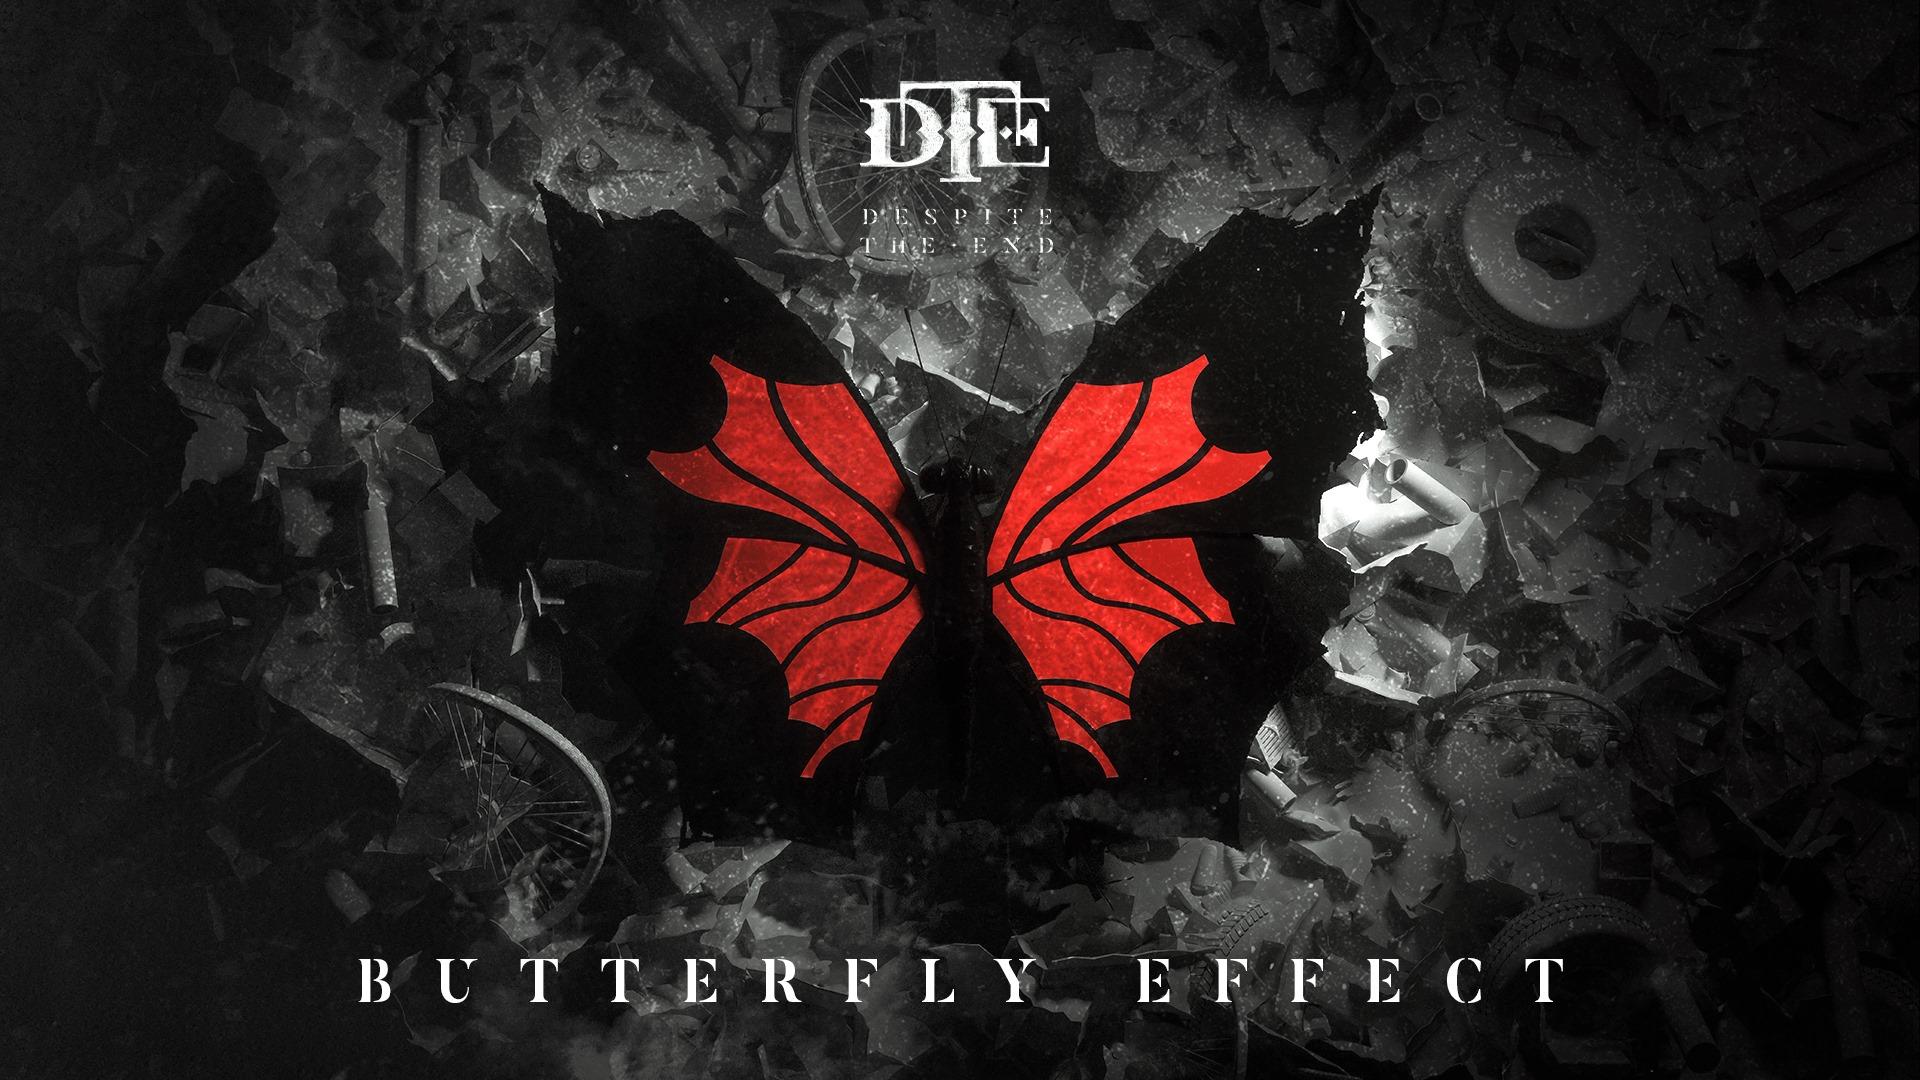 Dte buttefly effect